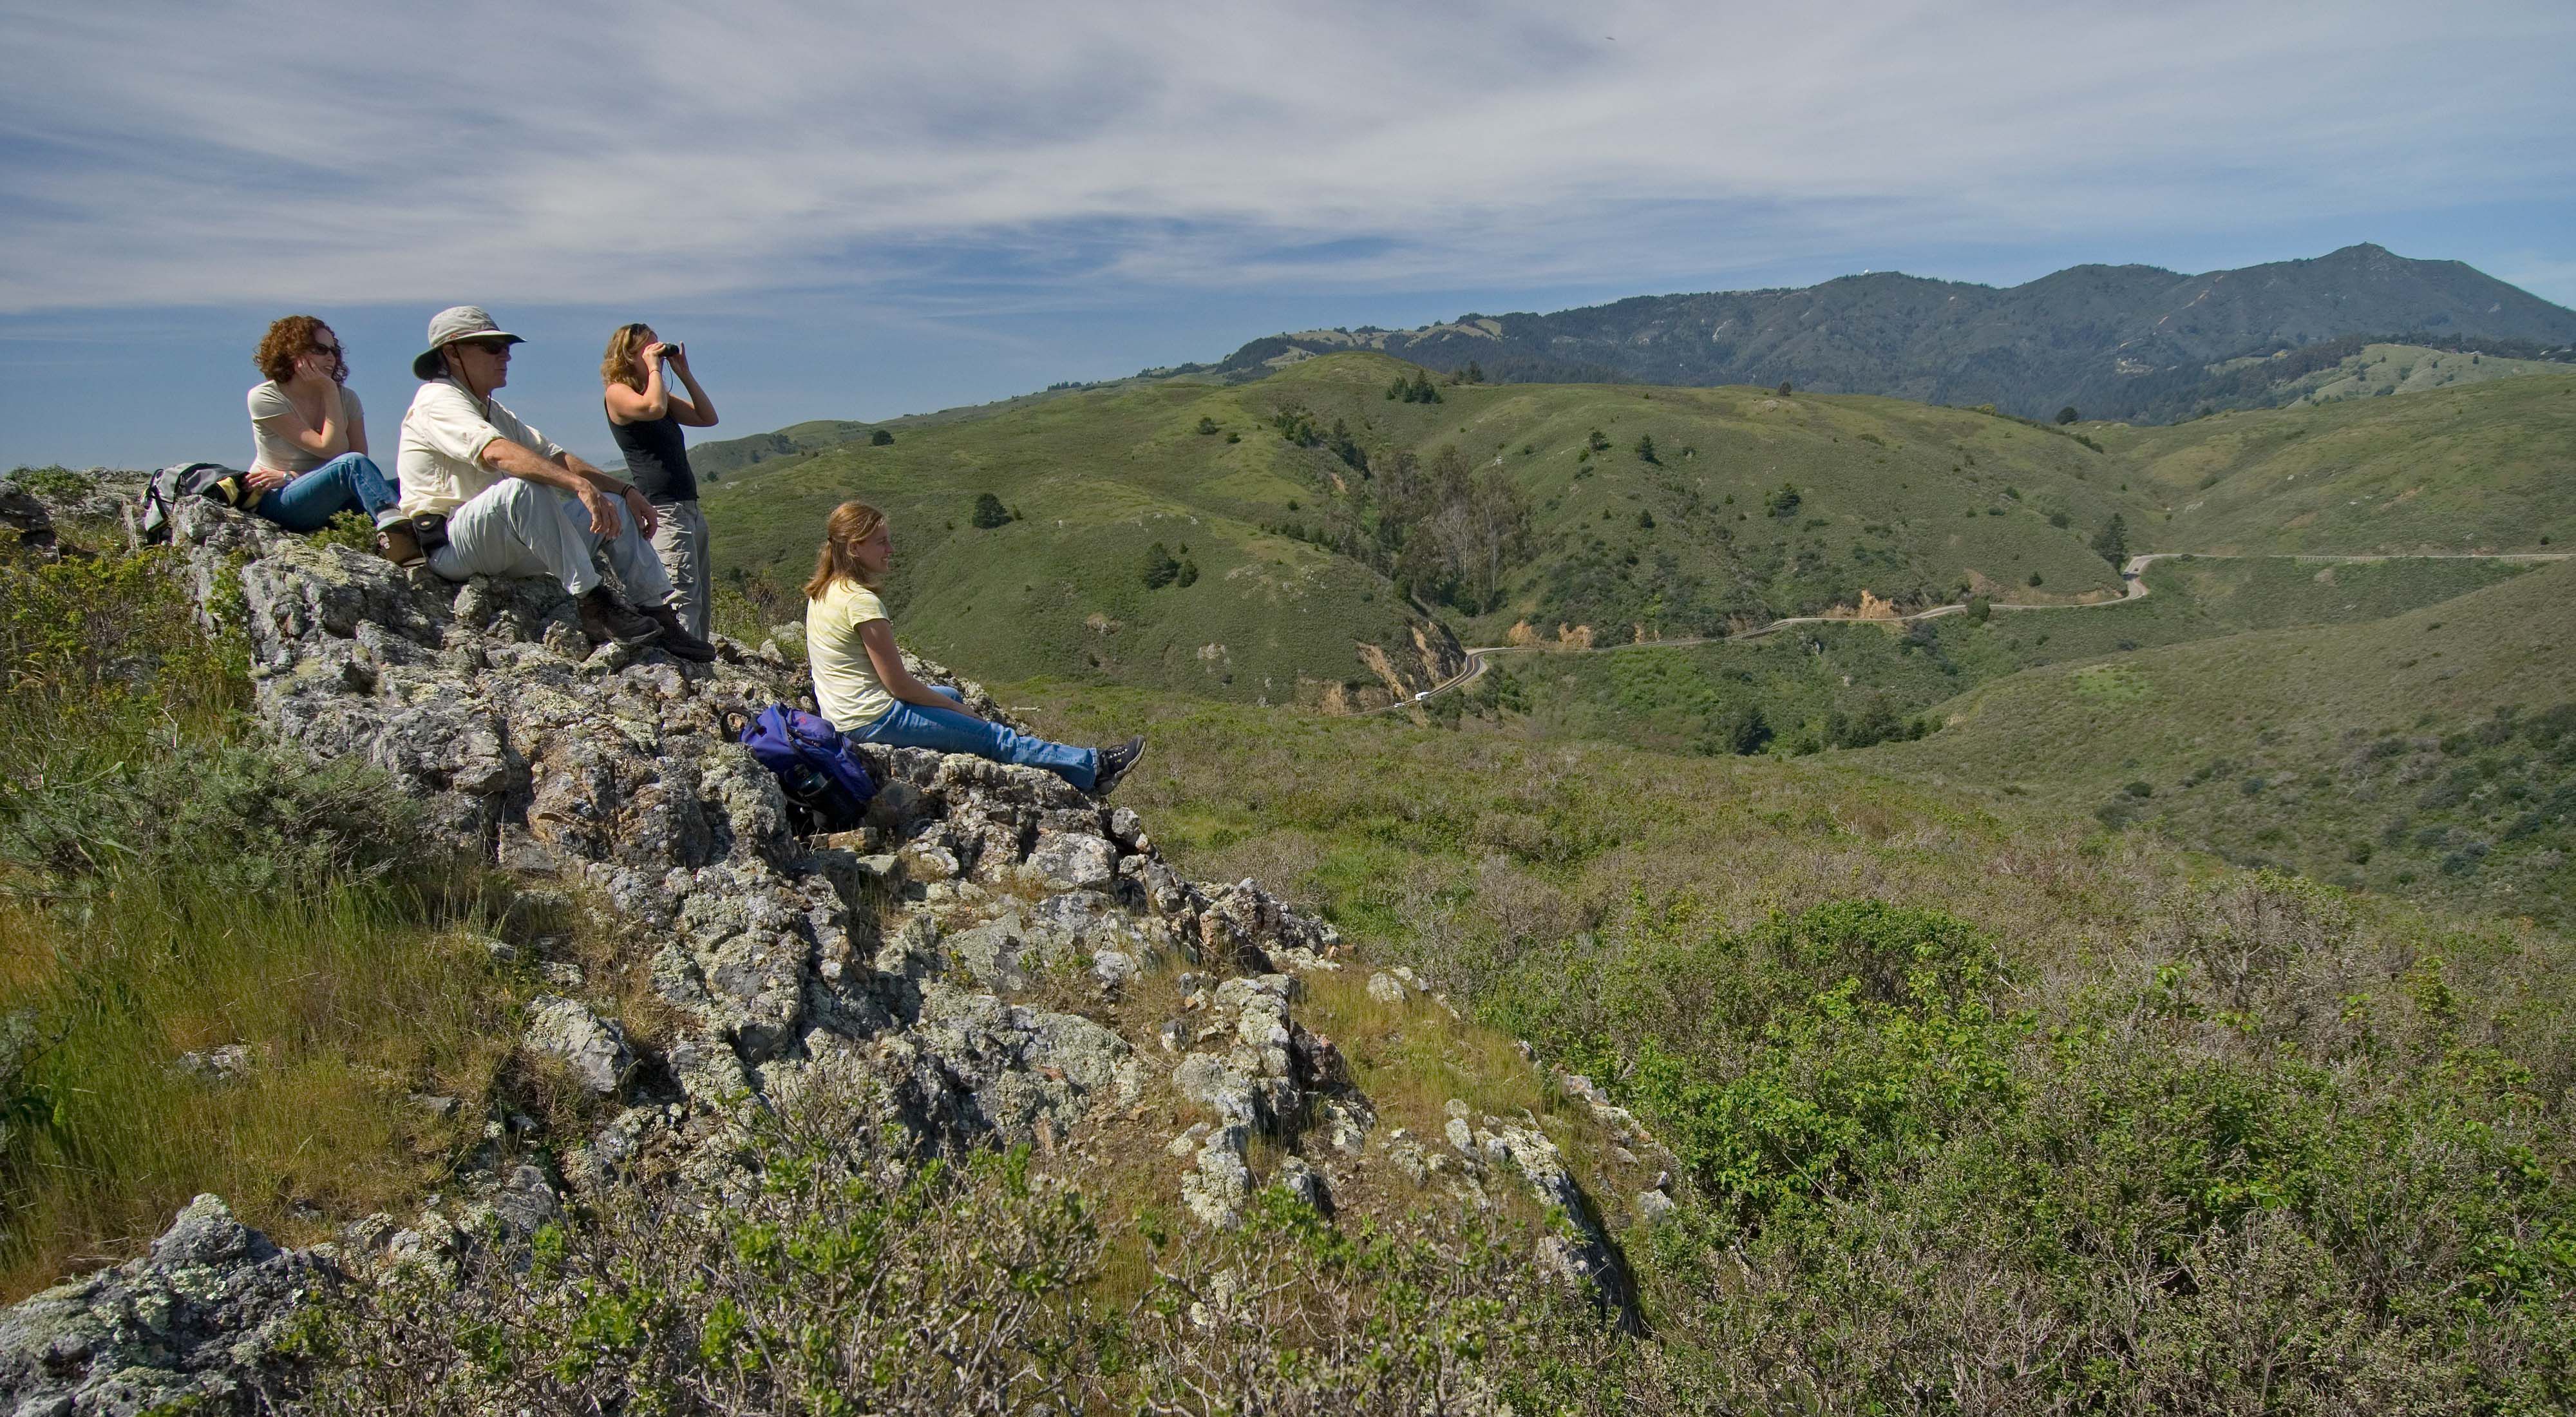 Conservancy staff pause to bird watch while hiking the Green Gulch trail above the Pacific coastline in California's Golden Gate National Recreation Area. 